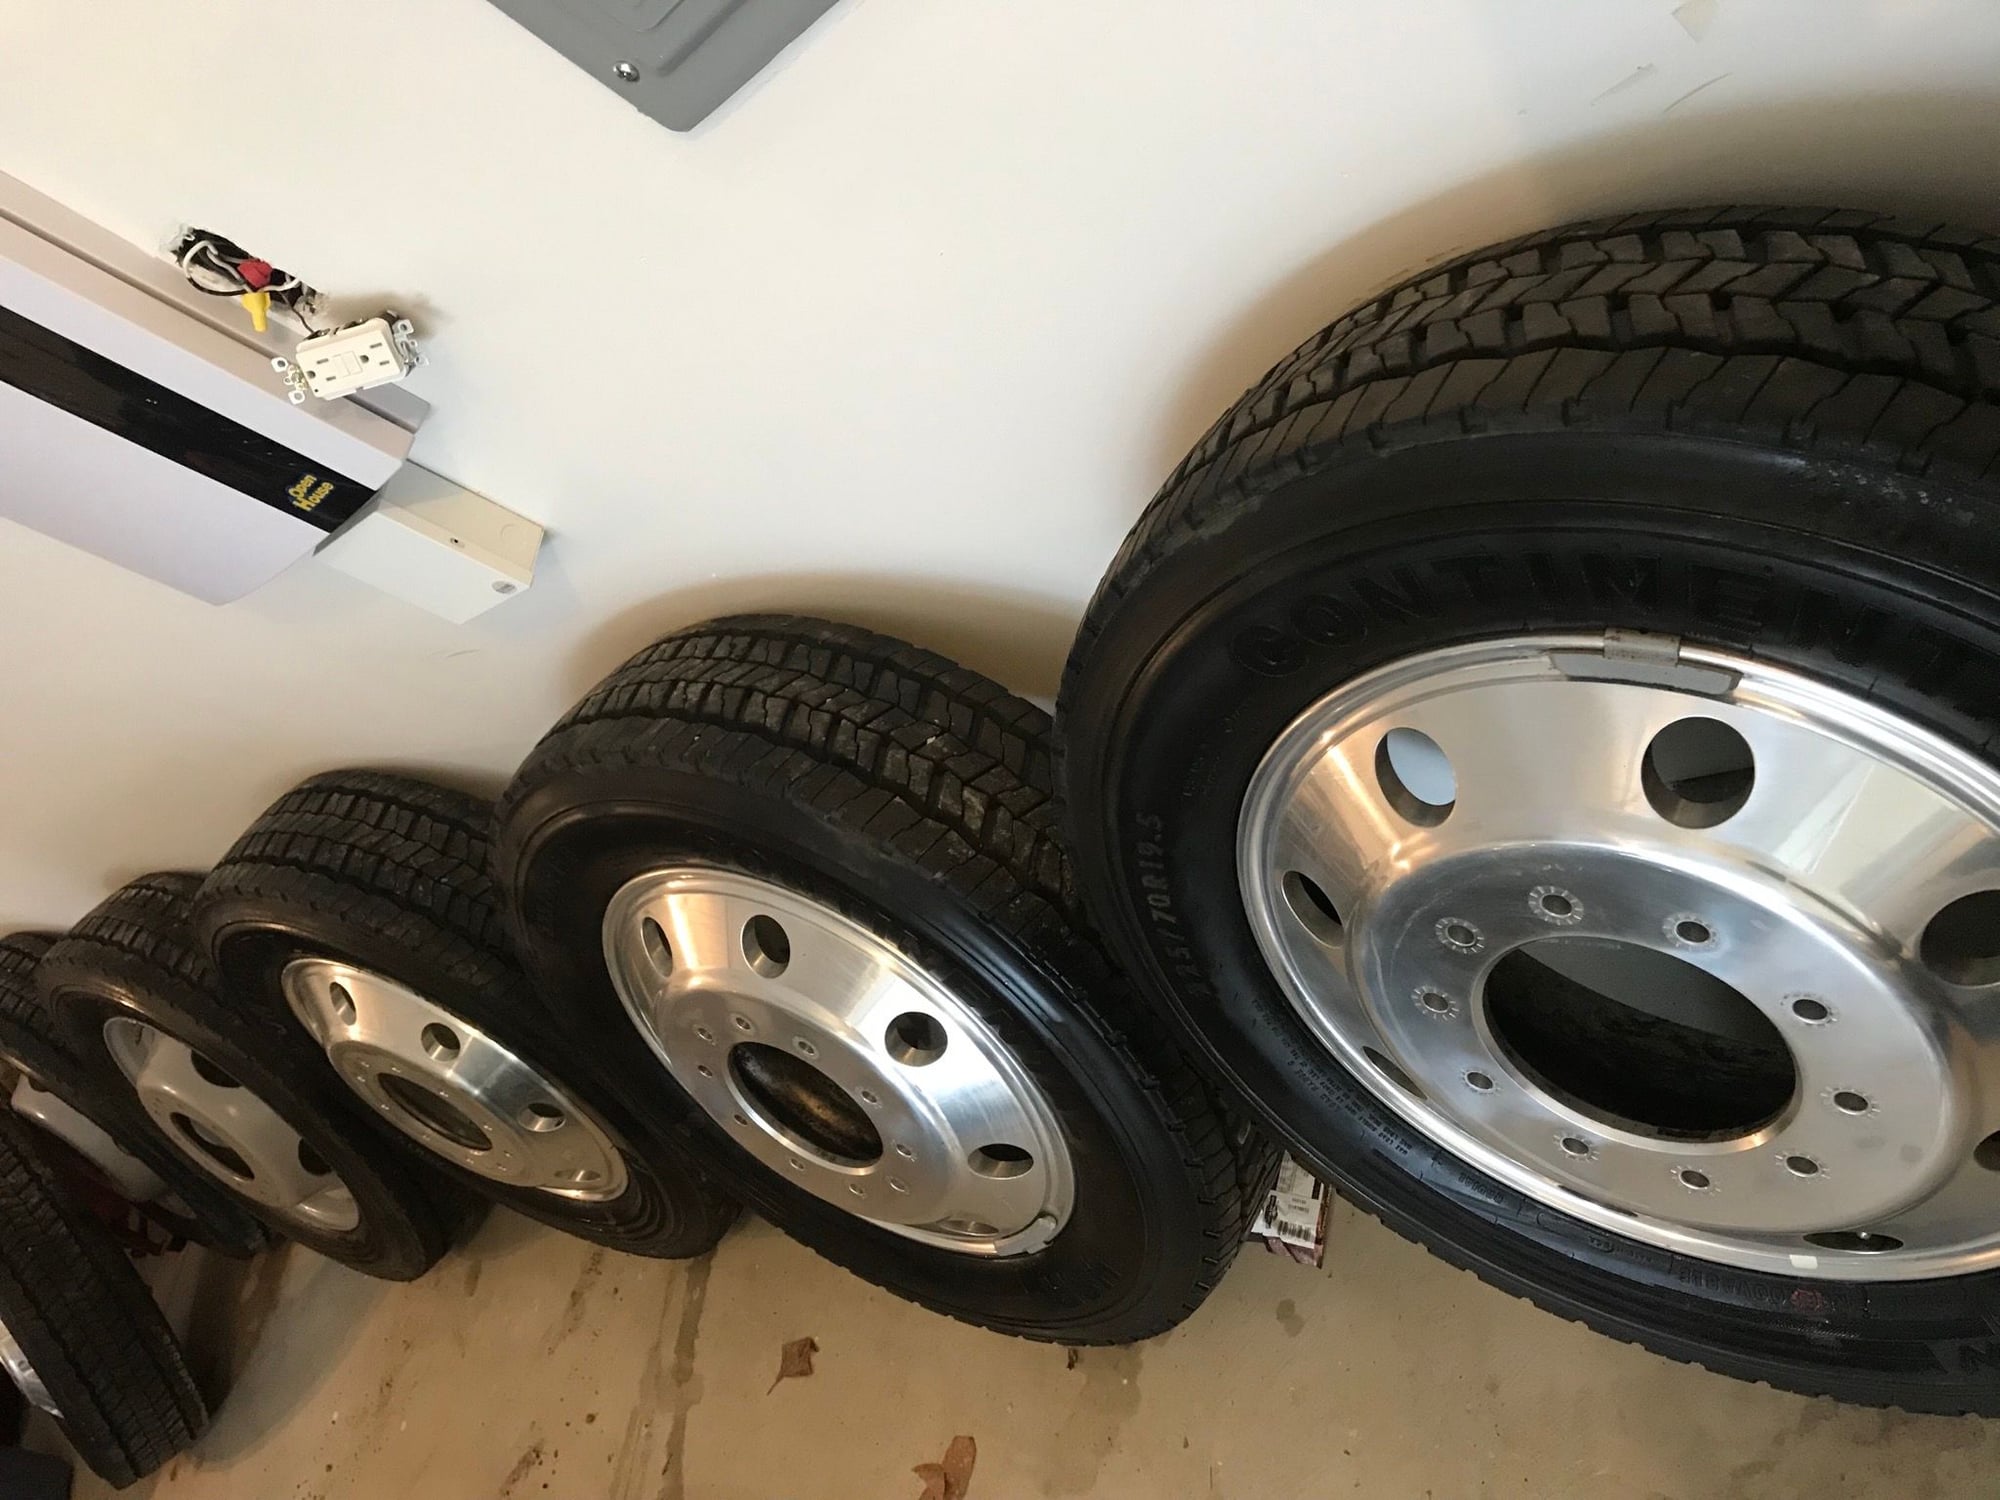 Wheels and Tires/Axles - 2019 450 wheels tires - Used - 2017 to 2019 Ford F-450 Super Duty - Cleveland, OH 44133, United States